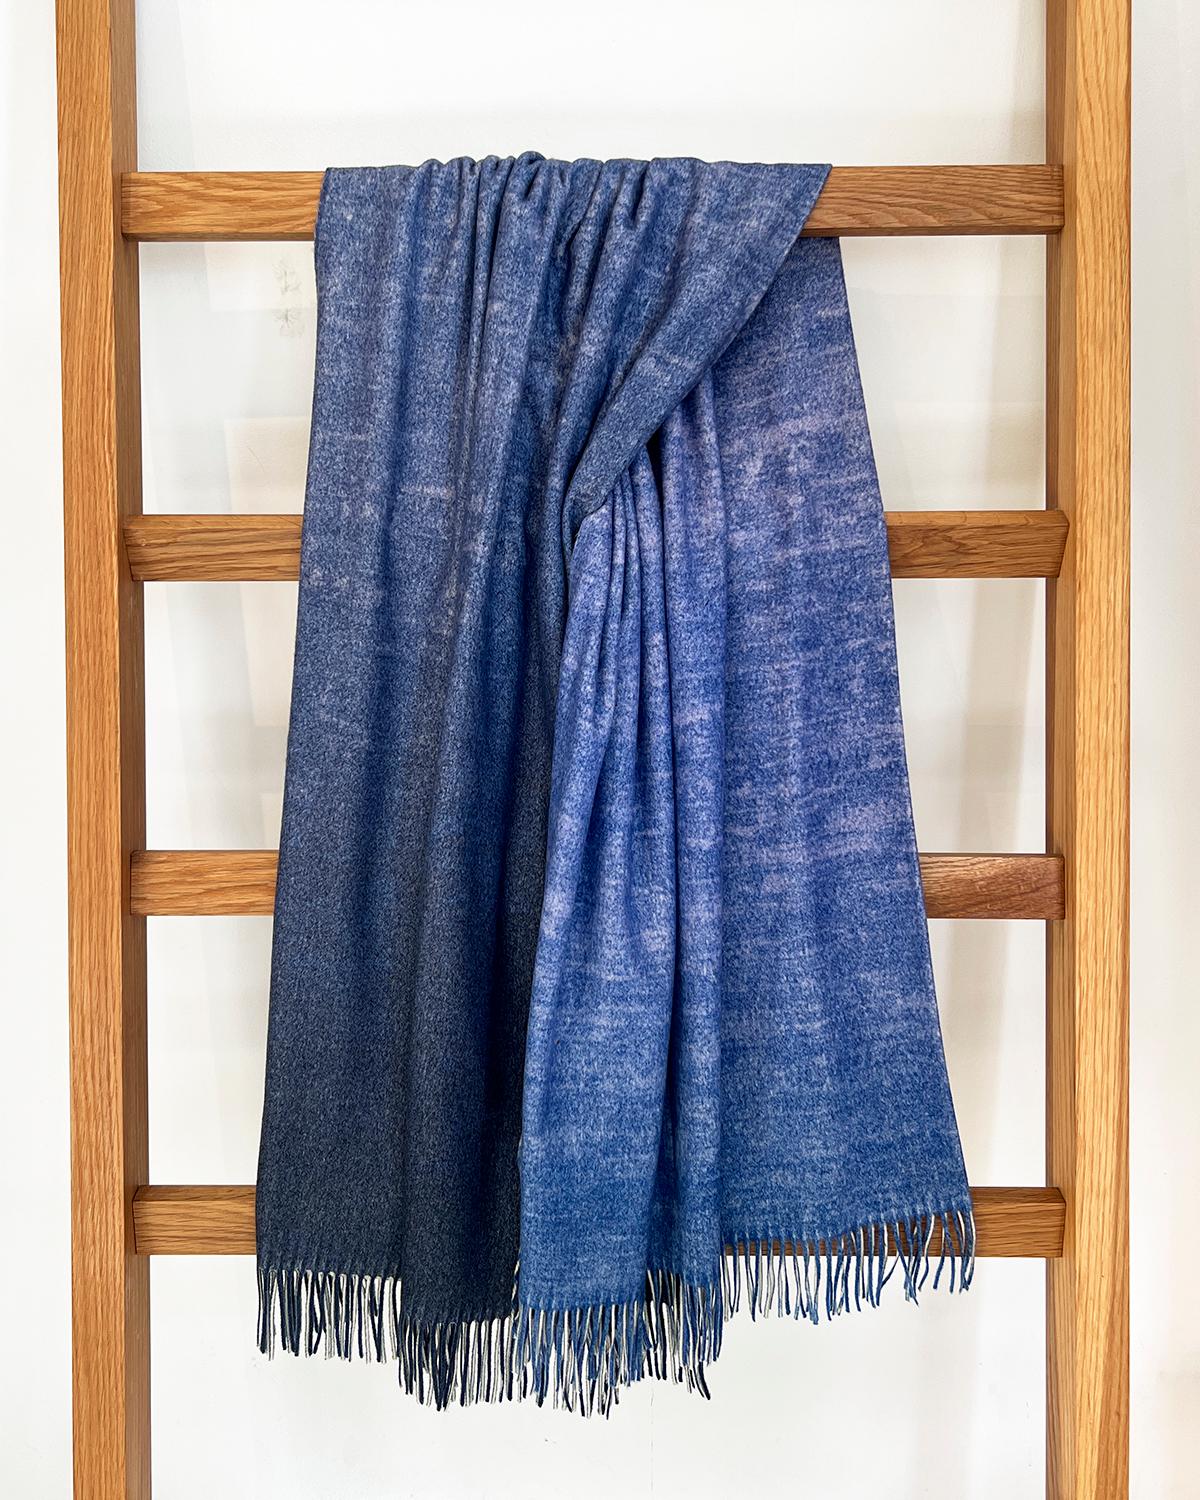 Hand-Woven Ombre Merino Wool Soft Blanket Throw in Deep Blue, in Stock For Sale